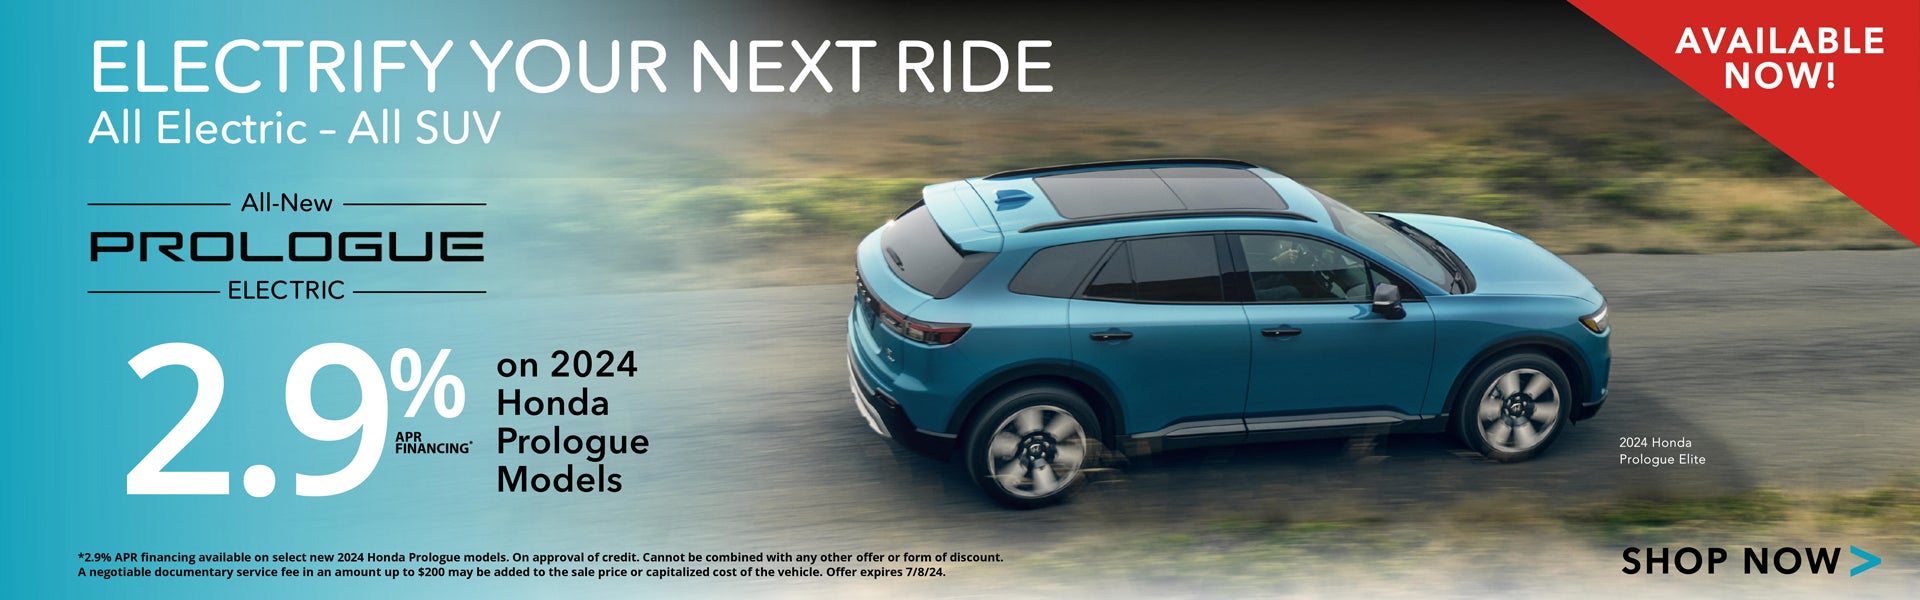 All New Prologue Electric SUV 2.9% APR